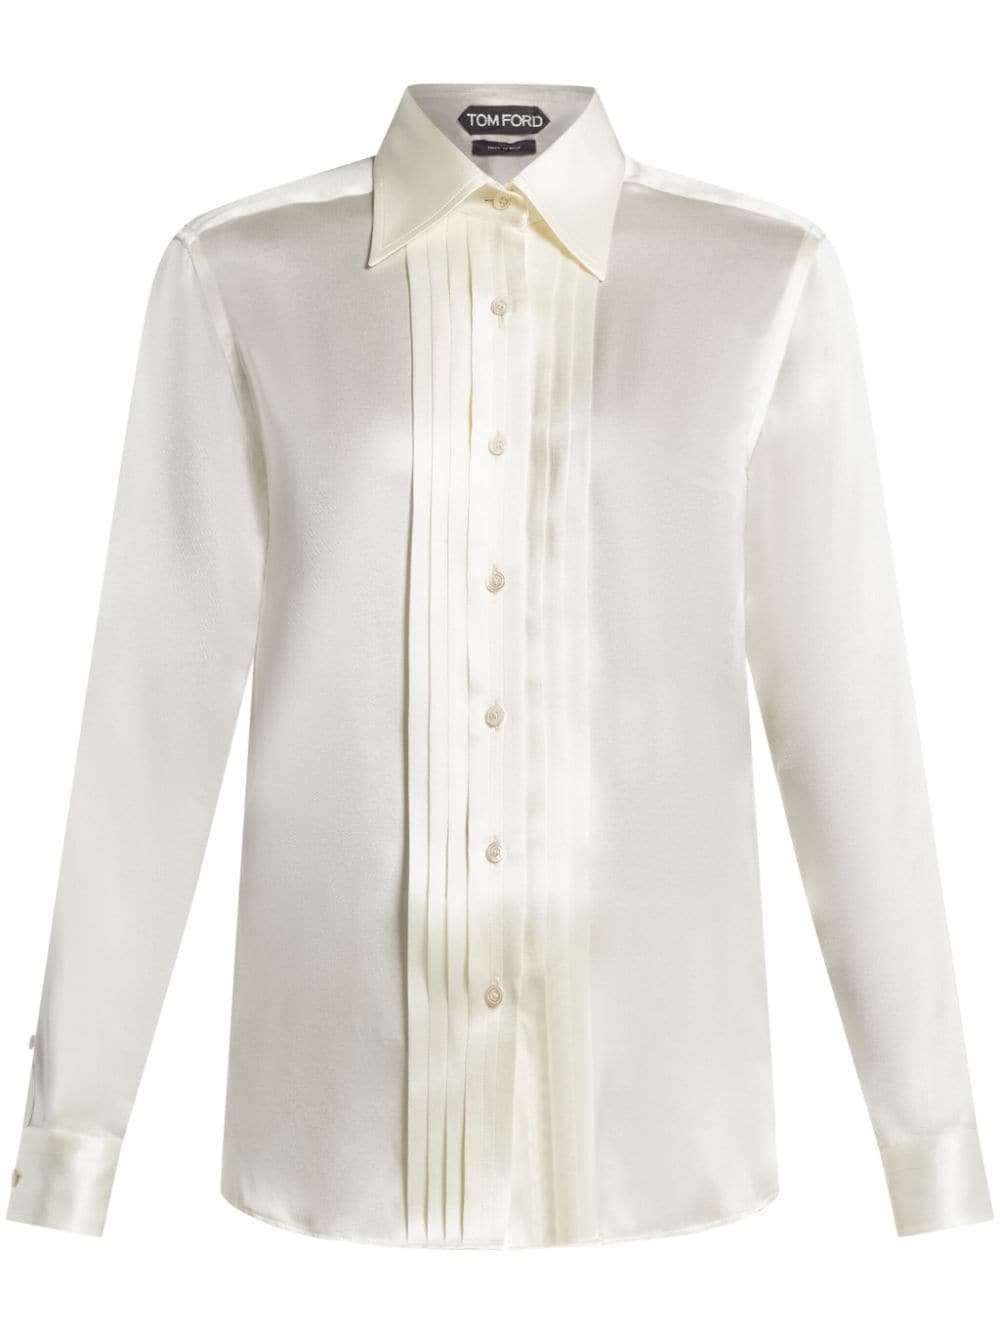 Image 1 of TOM FORD pleated silk shirt